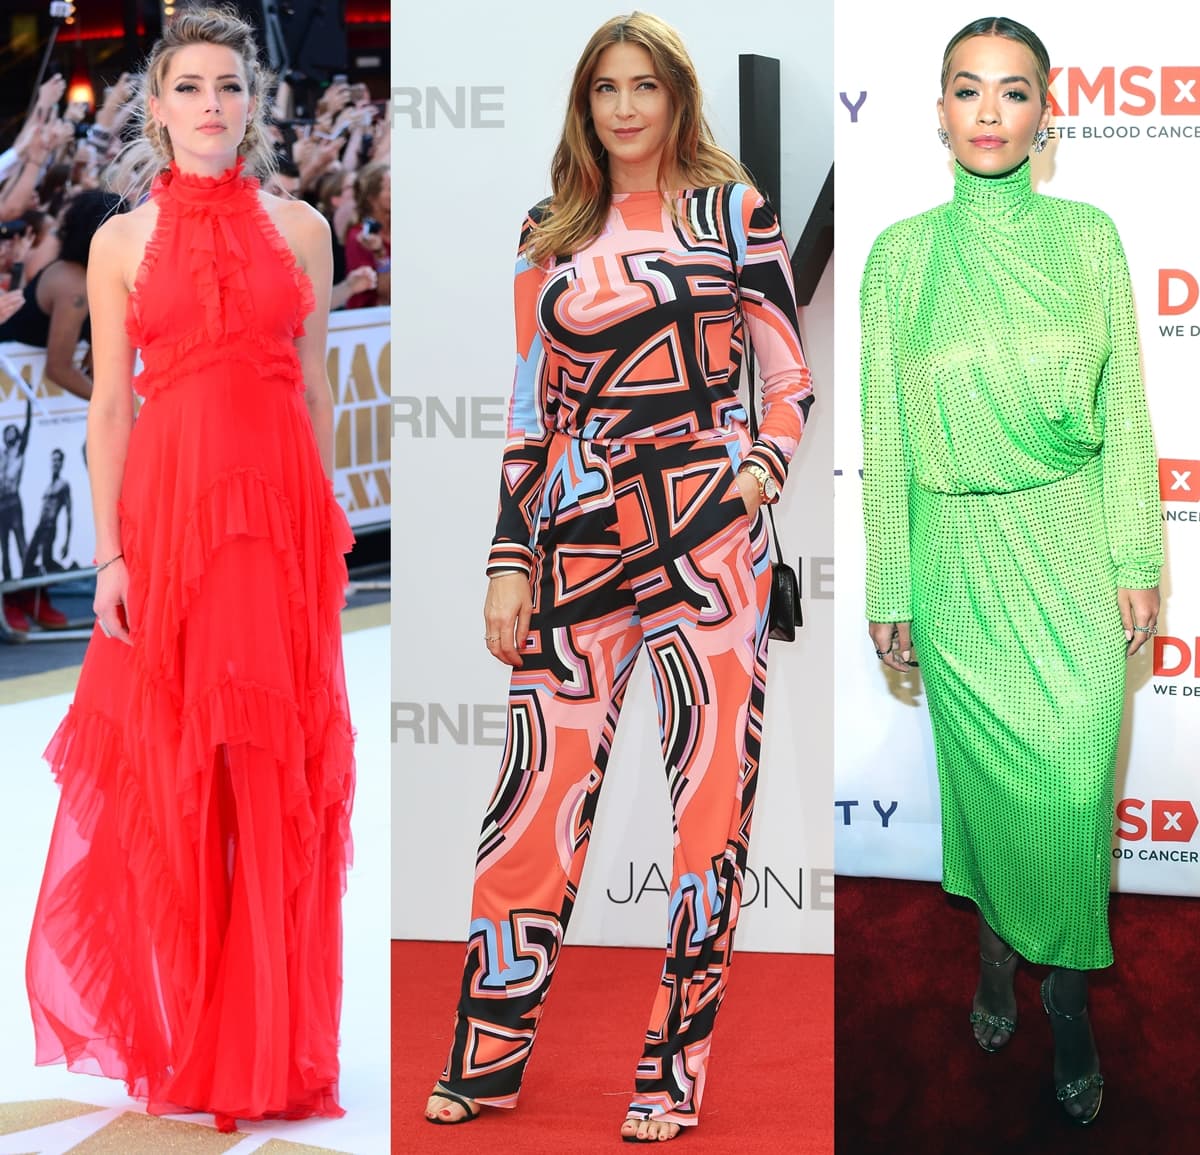 Amber Heard, Lisa Snowdon, and Rita Ora wearing outfits by Emilio Pucci